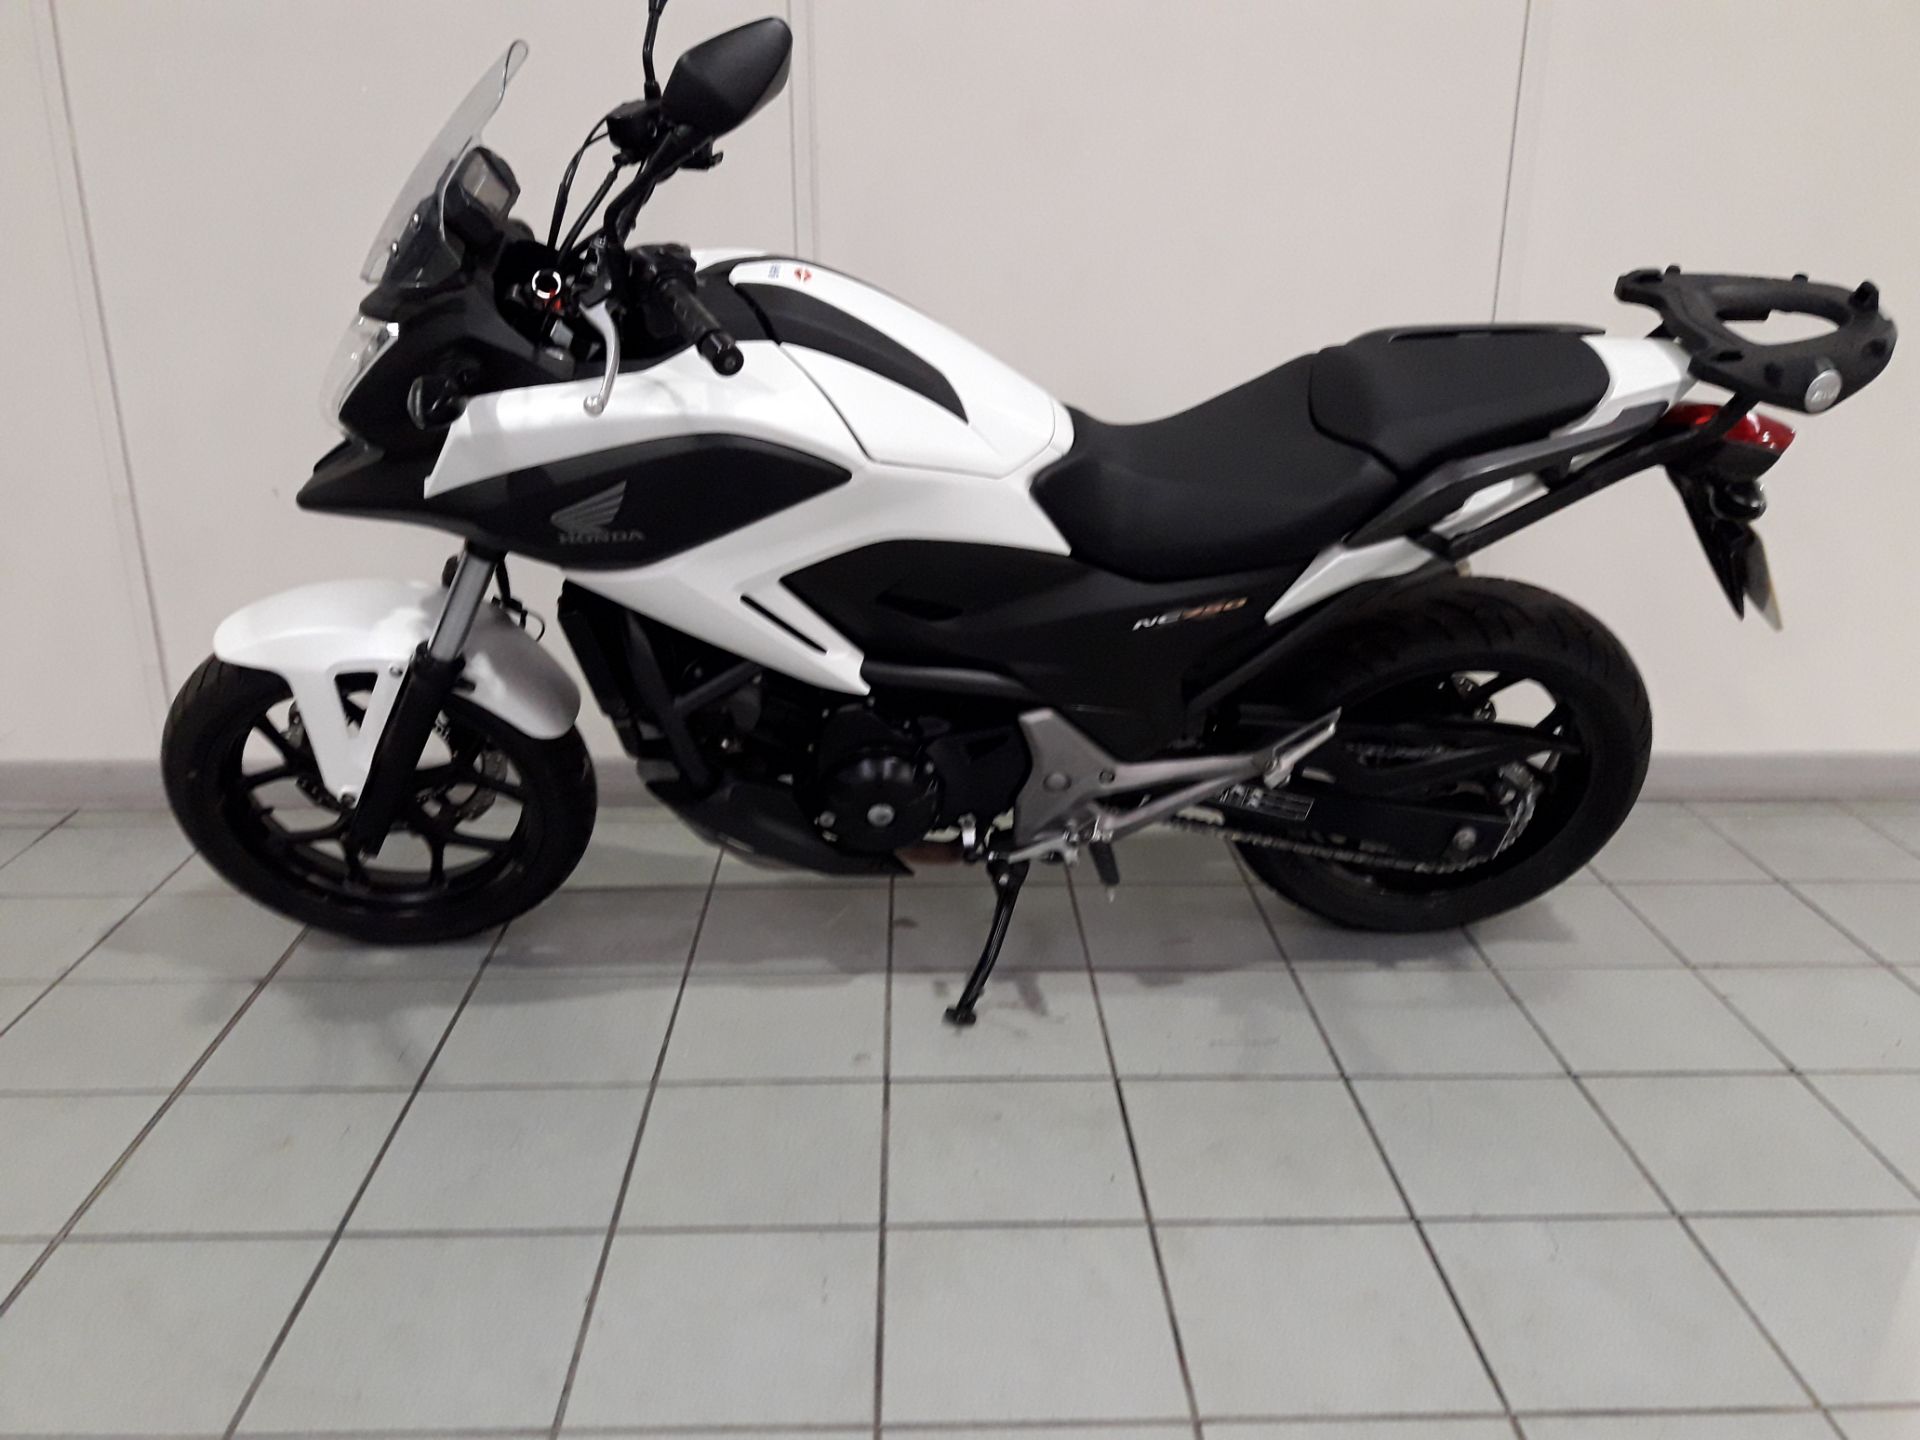 Honda NC750X in White - 65 Plate - 14133 Miles - 1 Owner - CLTBC - Location: Altrincham WA14 - Image 3 of 15